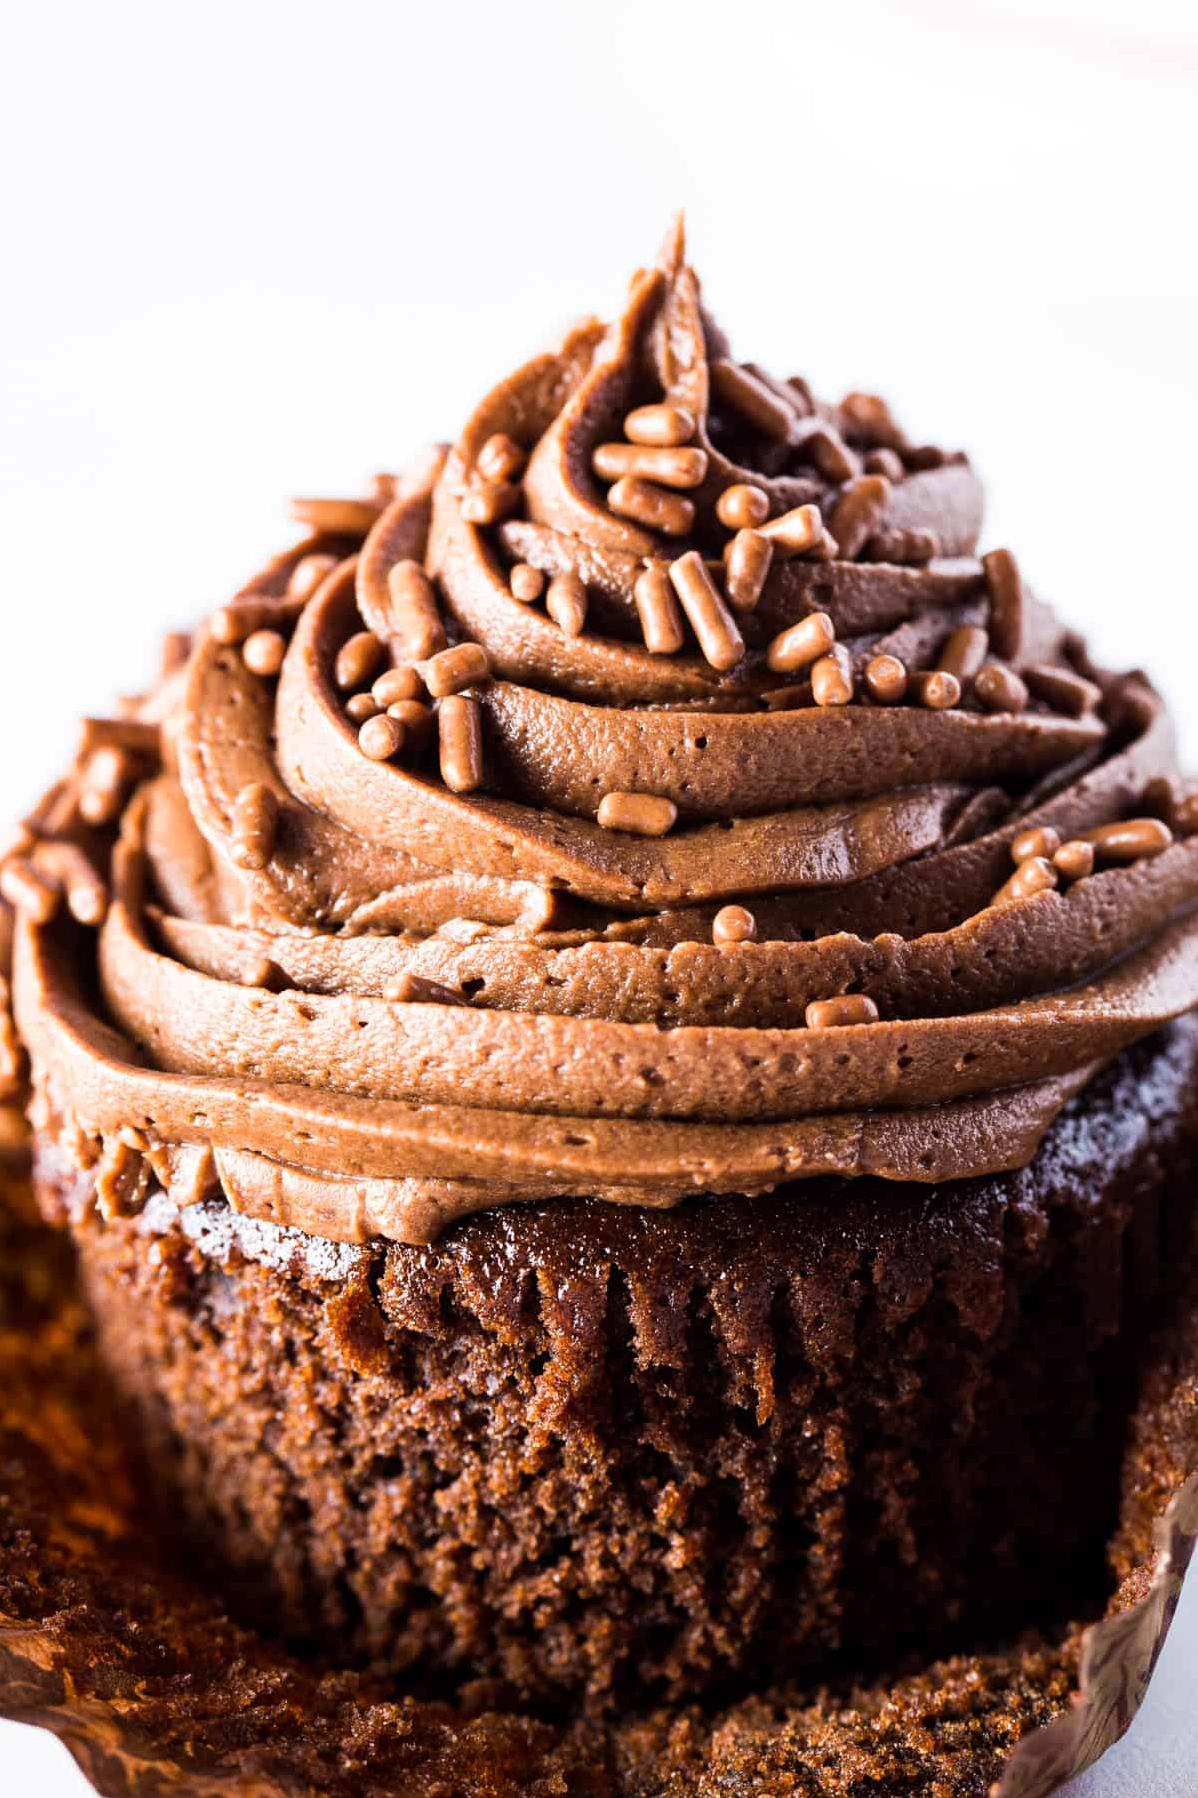  Chocoholics unite! These cupcakes are not only gluten-free, they are also dairy-free – and packed with the rich, chocolatey flavor you crave.